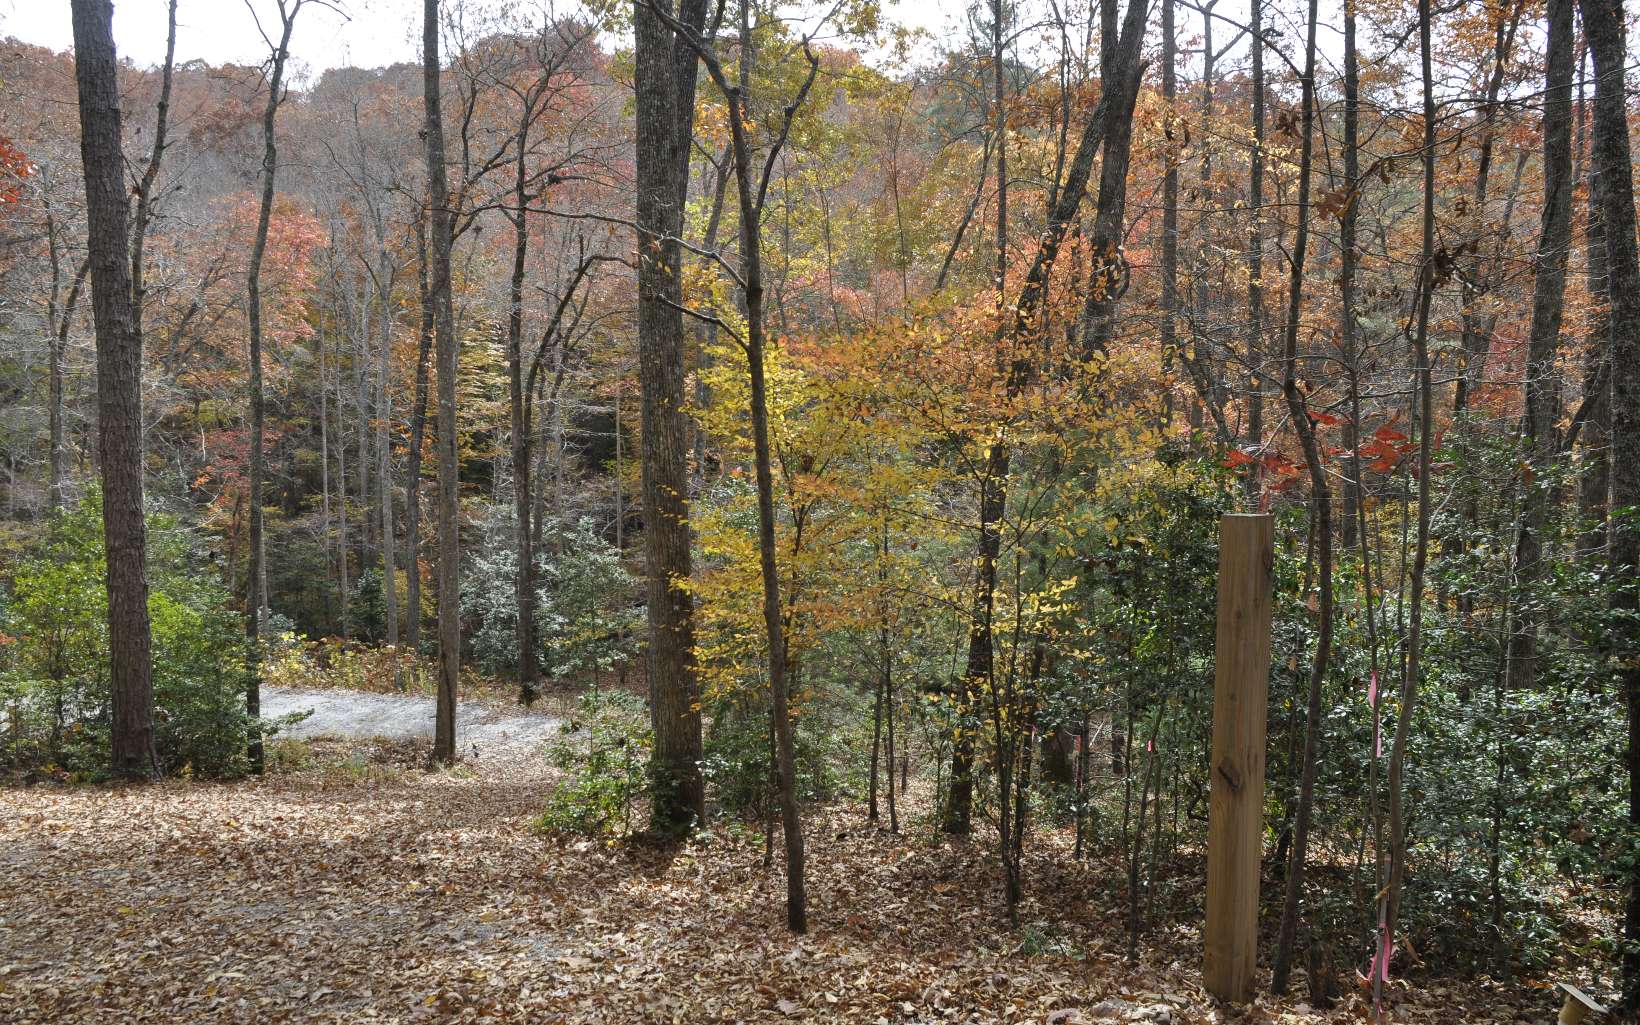 Two Lovely lots located in desirable Laurel Glen subdivision with easy road access to the land. Creek nearby at rear of property. Fiber Optic network coming soon to area please verify with BRMEMC. Lot 2 has been upgraded with electric and driveway cut in, including gravel to a level building site. Close to downtown Blairsville and area shopping.